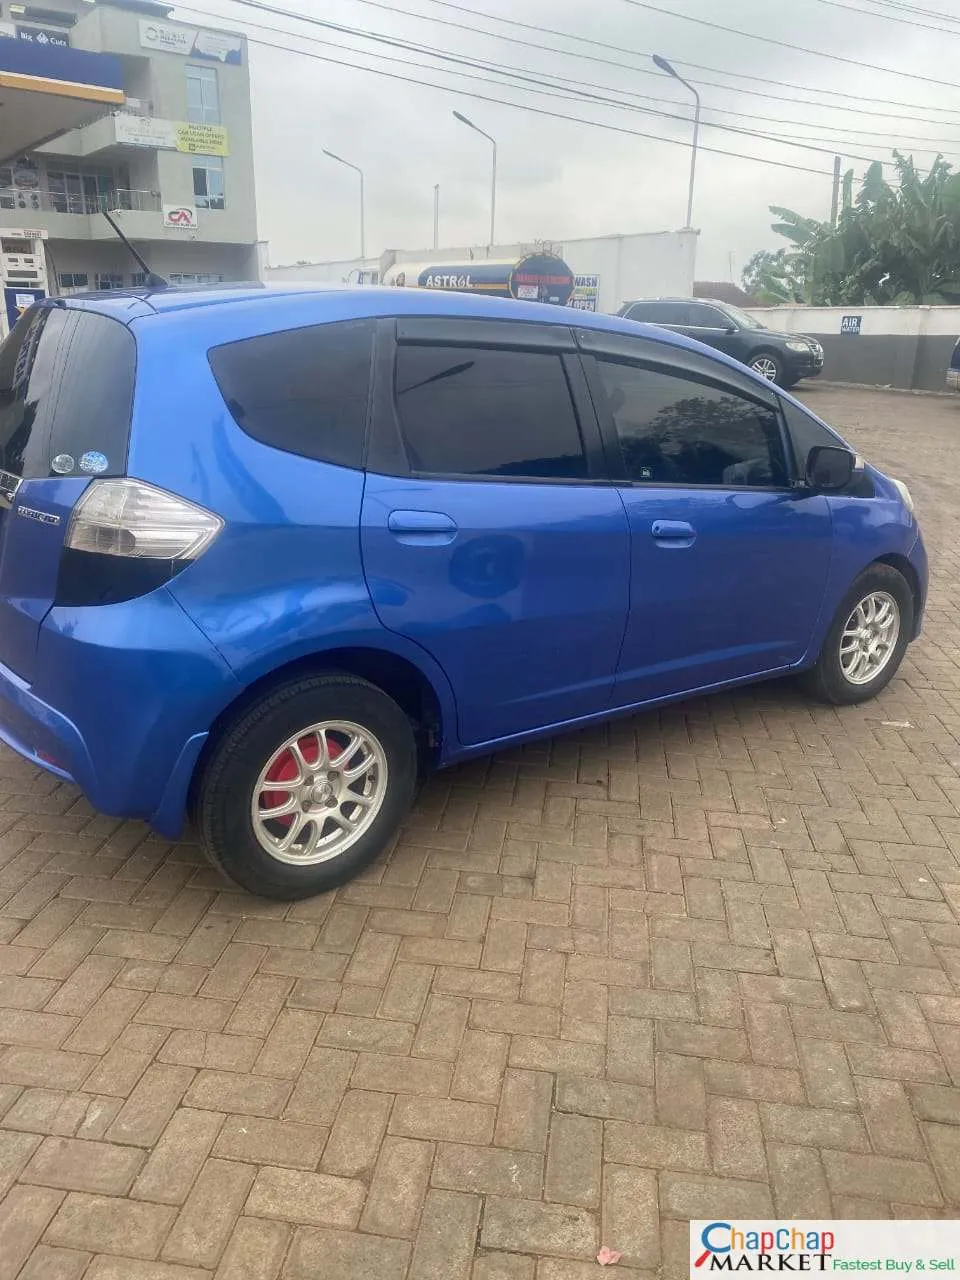 Honda fit hybrid for sale in Kenya You Pay 30% Deposit Trade in OK hire purchase installments EXCLUSIVELY 🔥